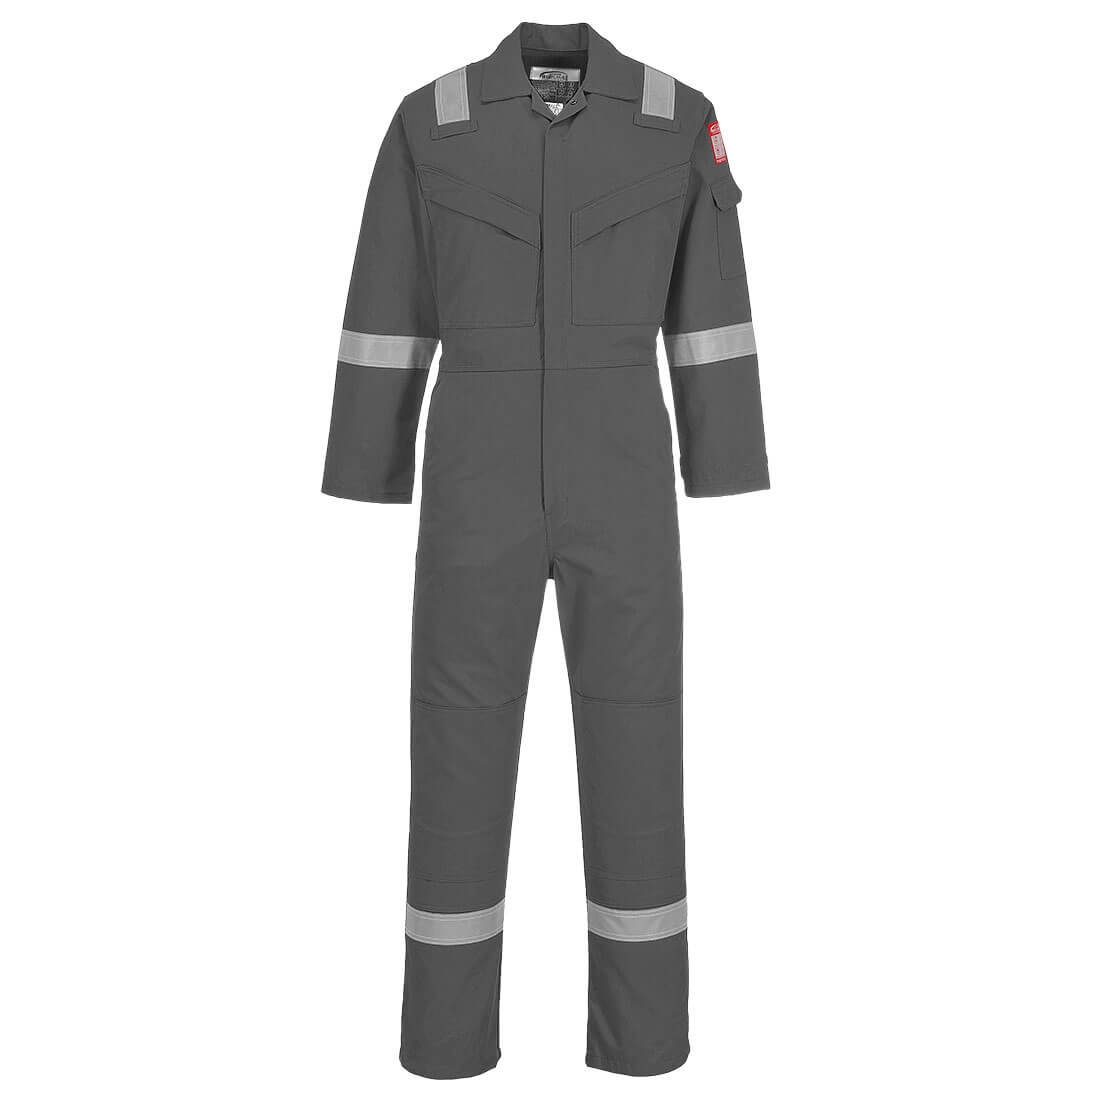 Image of Biz Flame Mens Aberdeen Flame Resistant Antistatic Coverall Grey 4XL 32"